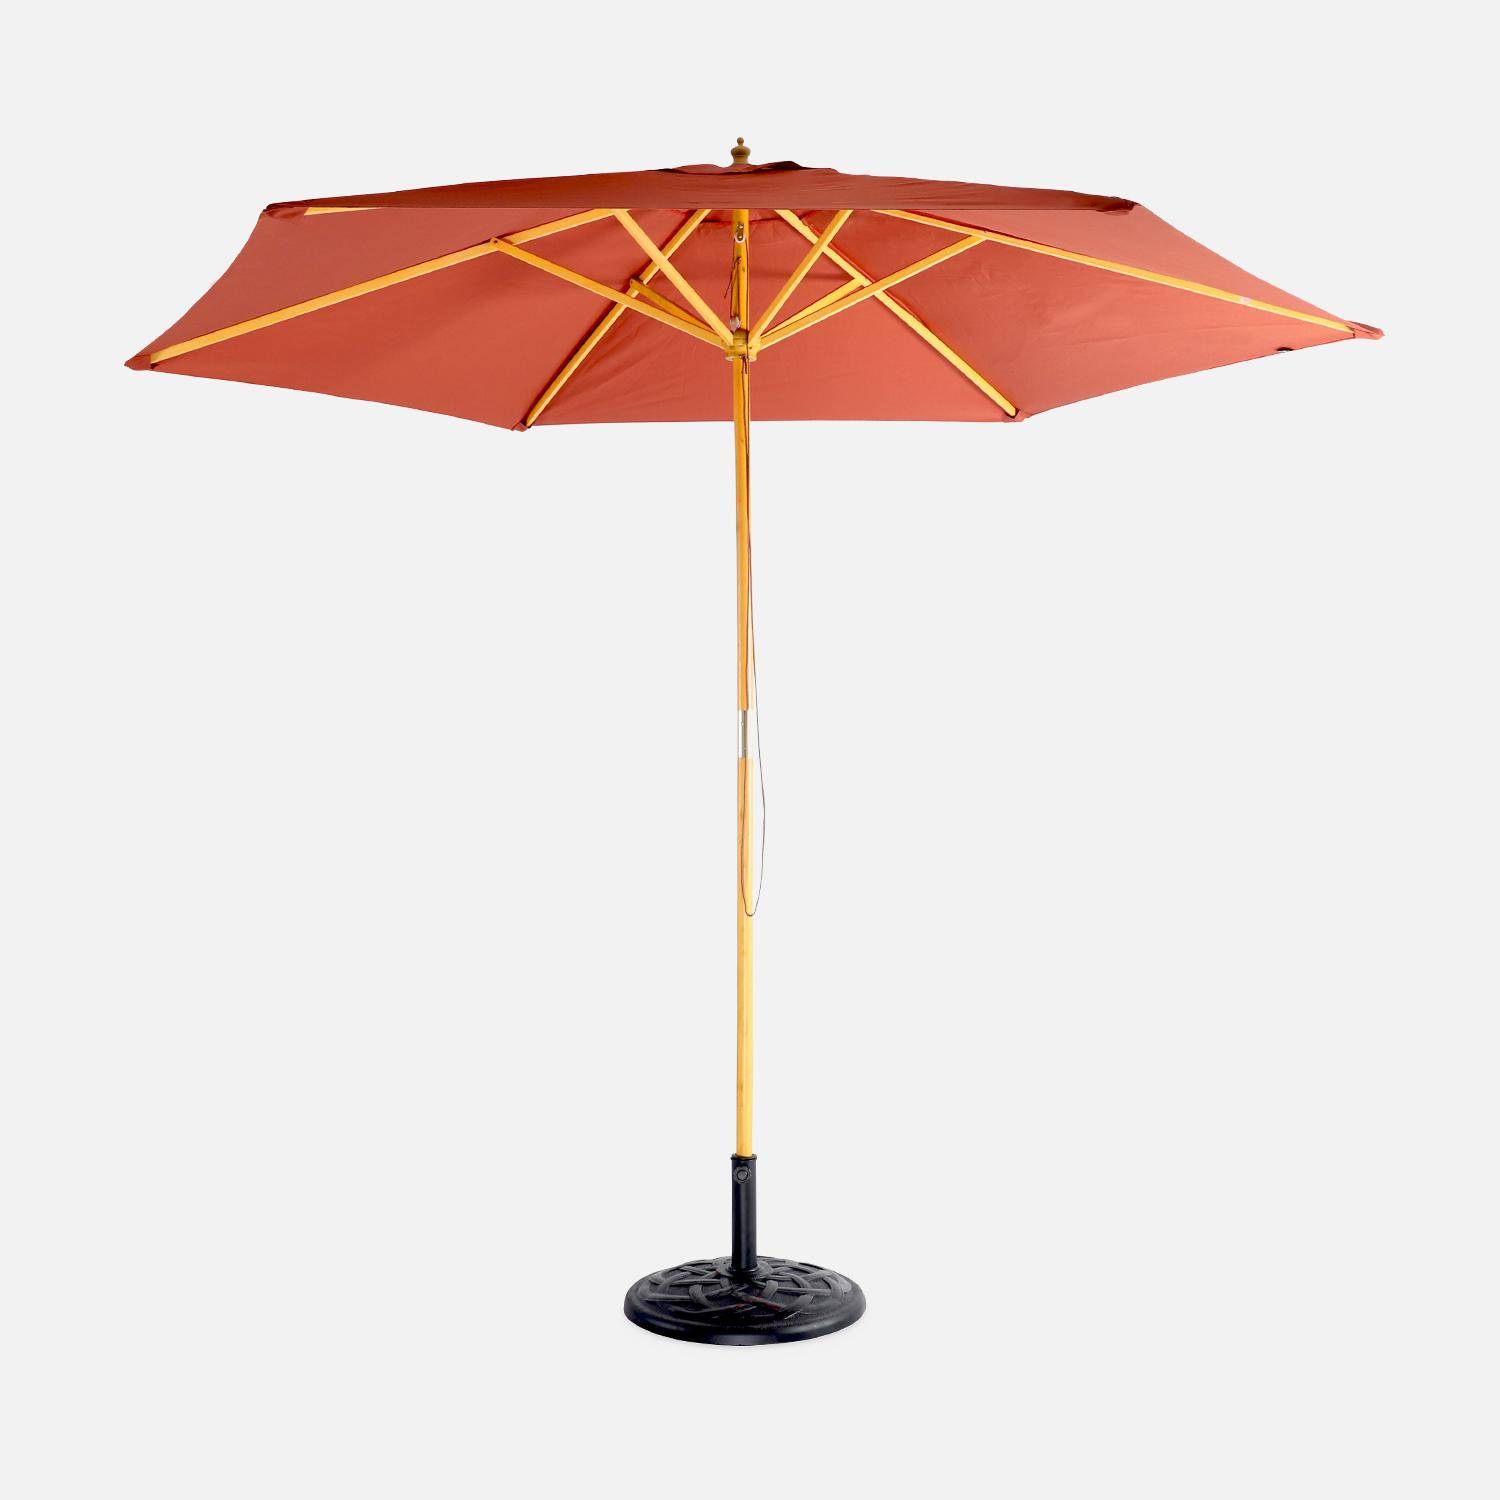 Round wooden parasol Ø300cm with straight pole -  adjustable aluminium central mast in wood and crank handle opening - Cabourg - Terracotta Photo1